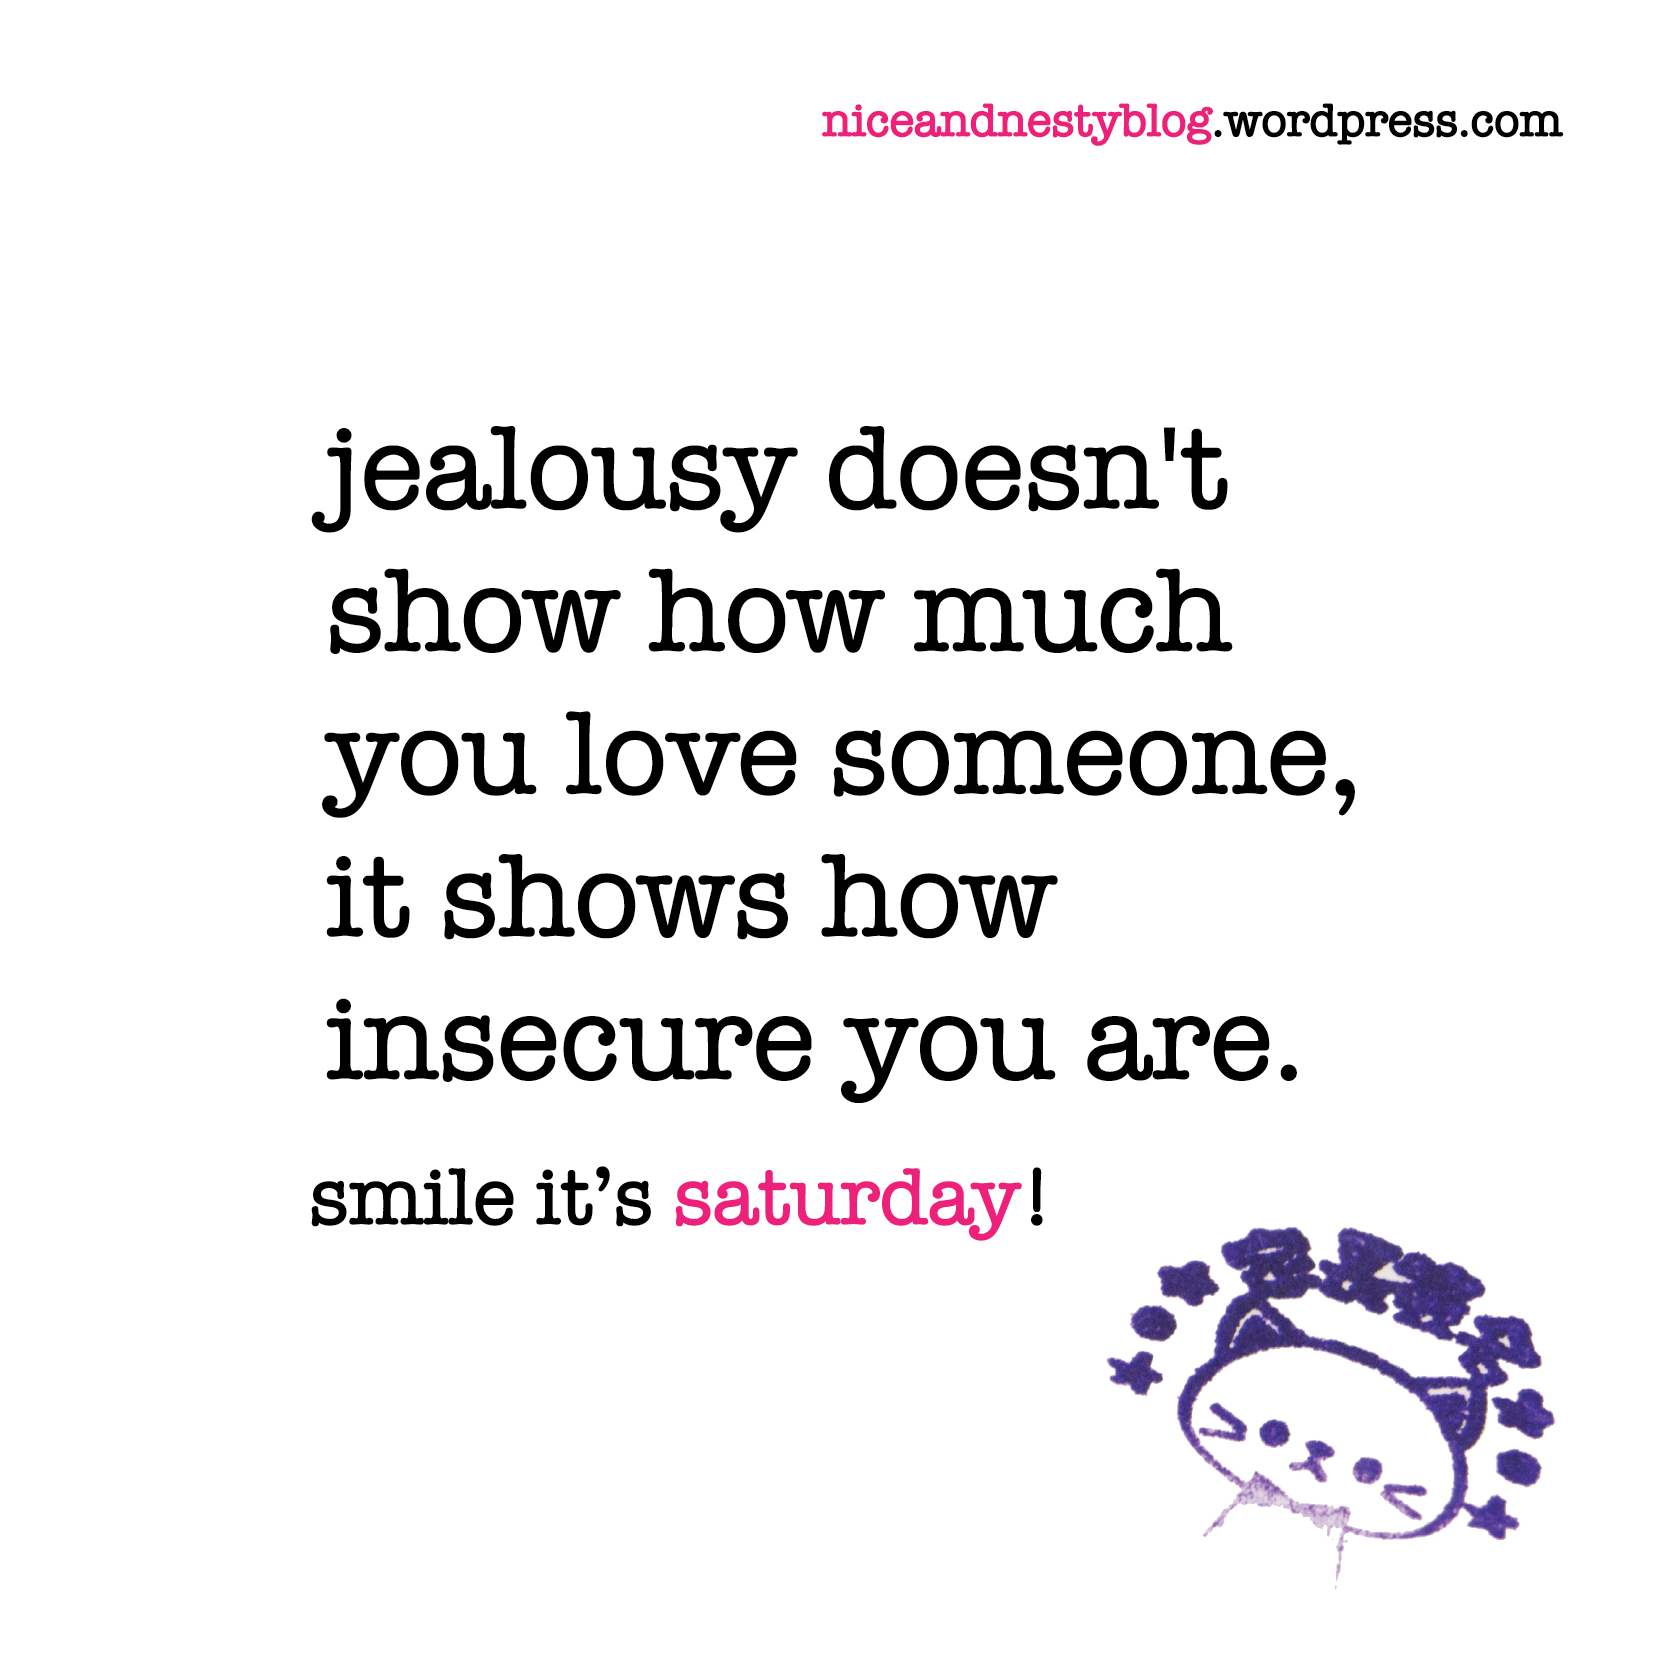 jealousy doesn t show how much you love someone it shows how insecure you